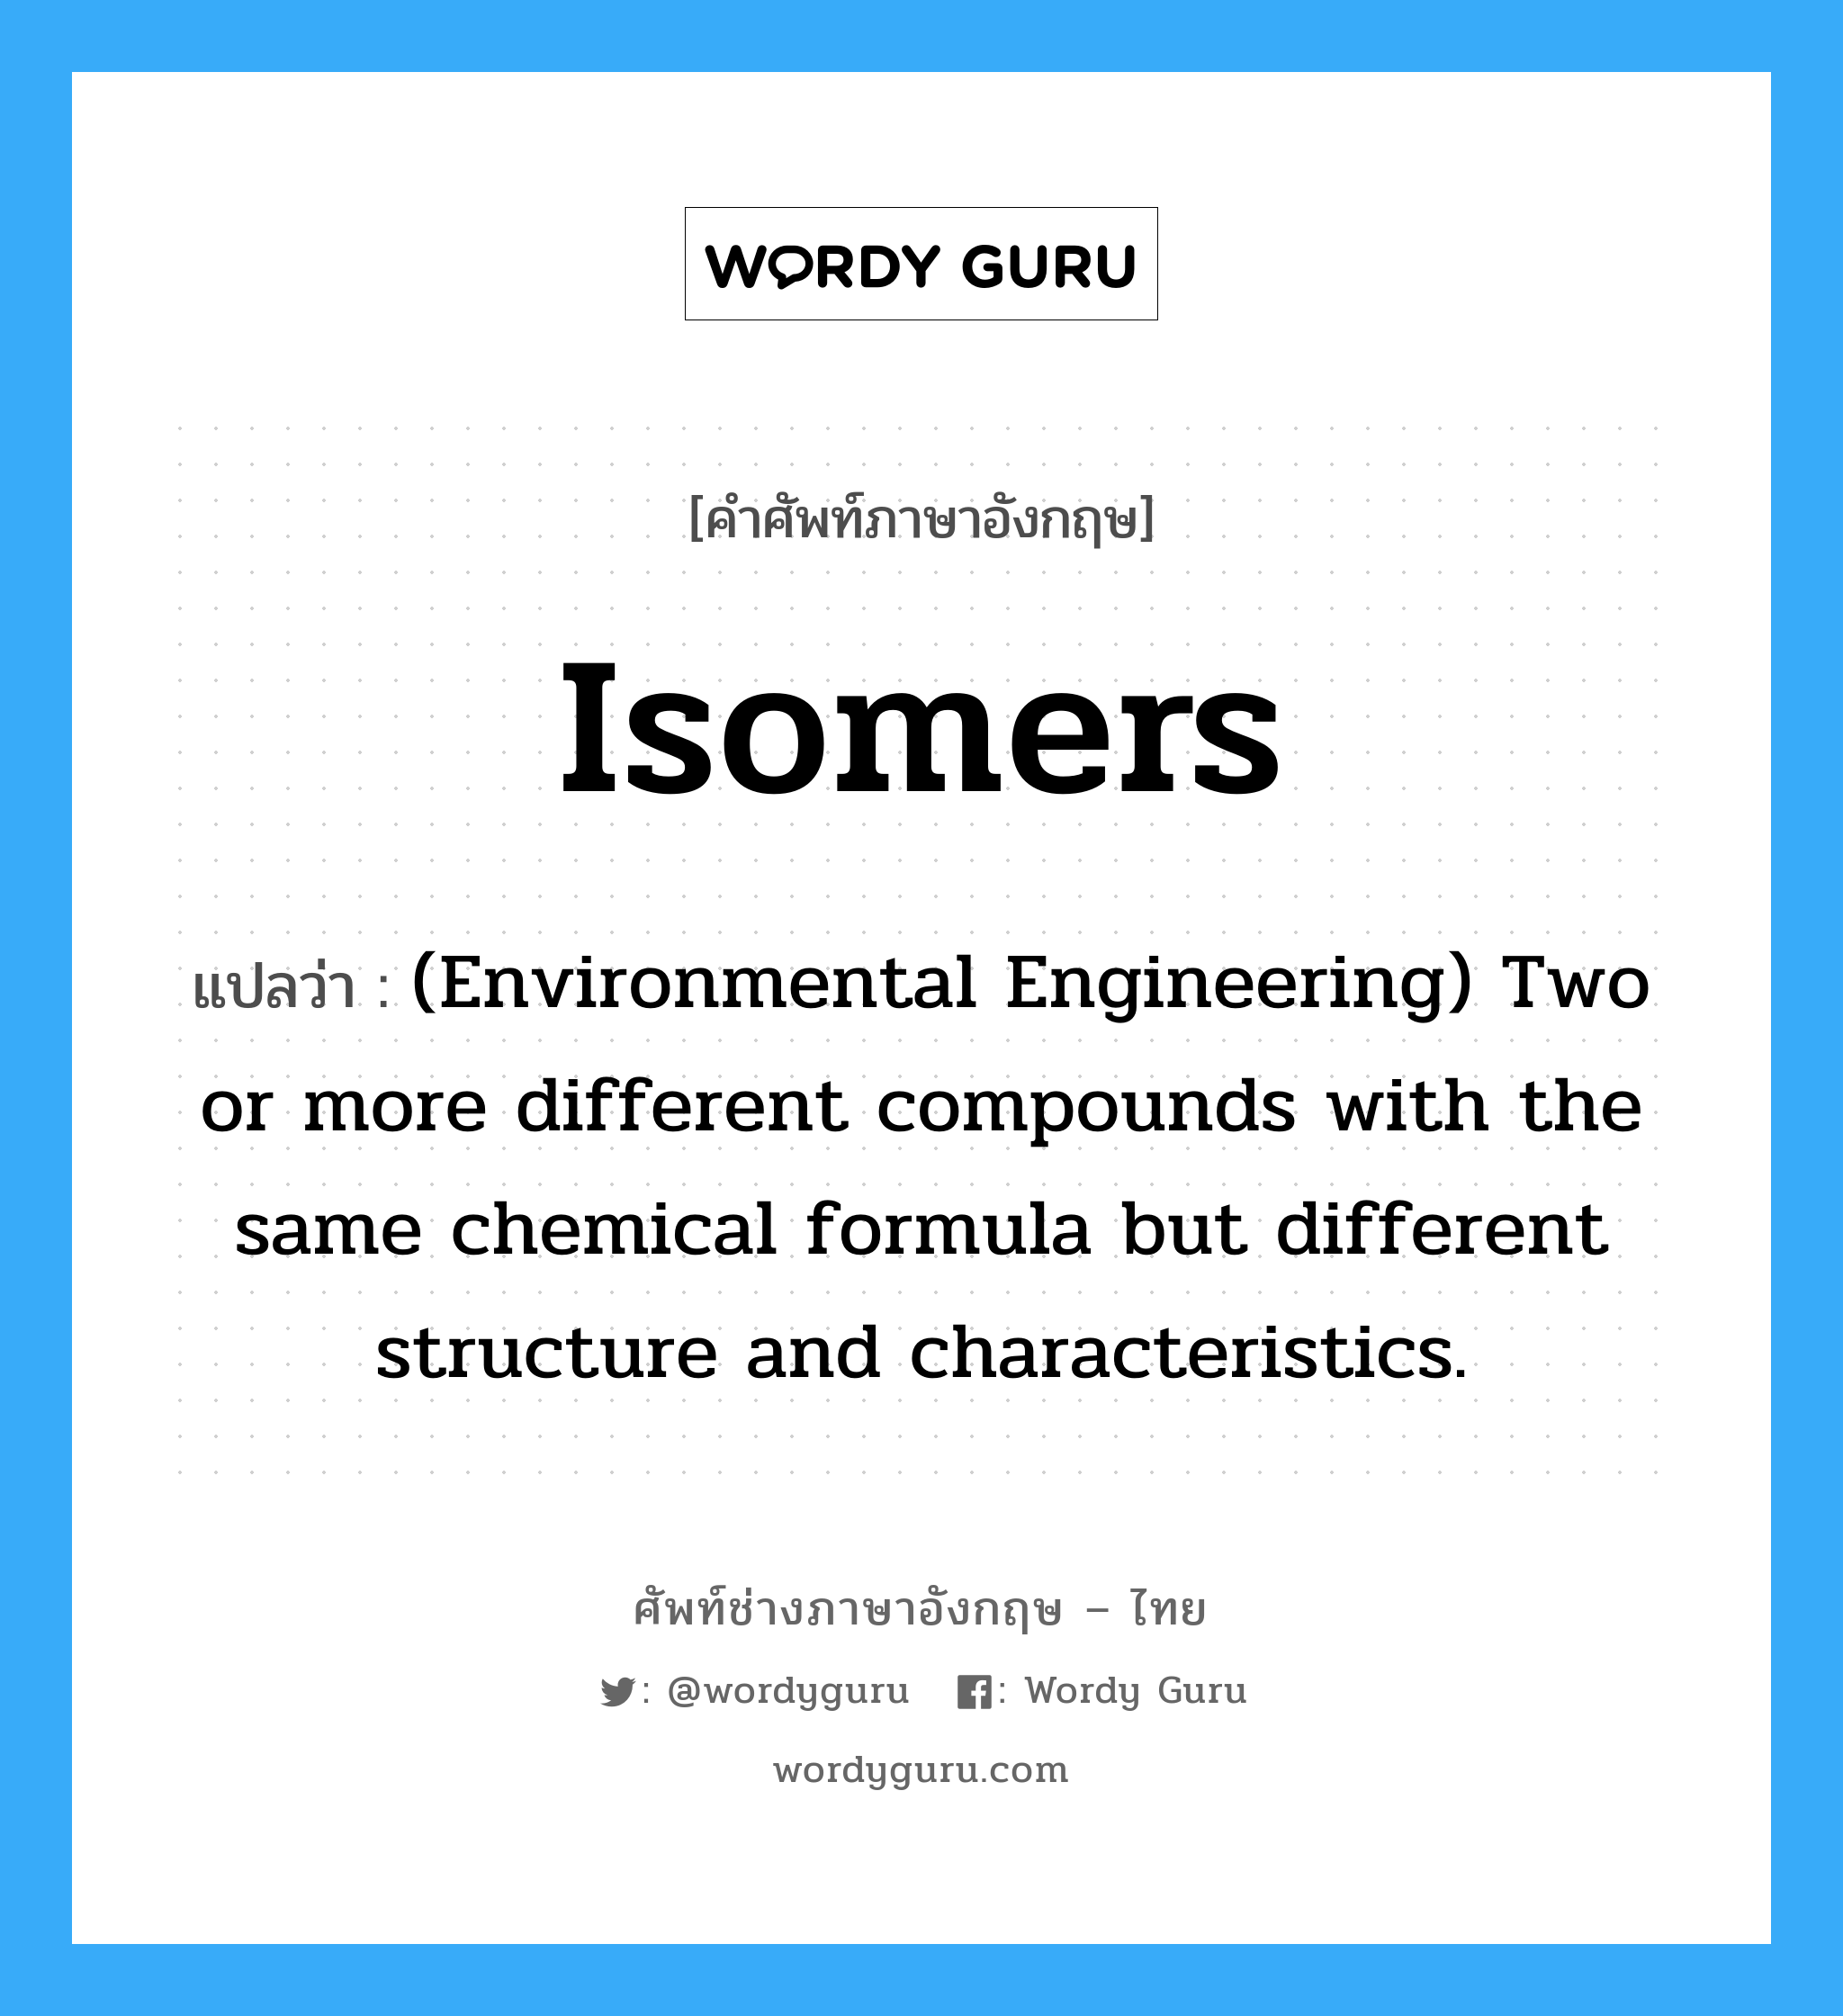 Isomers แปลว่า?, คำศัพท์ช่างภาษาอังกฤษ - ไทย Isomers คำศัพท์ภาษาอังกฤษ Isomers แปลว่า (Environmental Engineering) Two or more different compounds with the same chemical formula but different structure and characteristics.